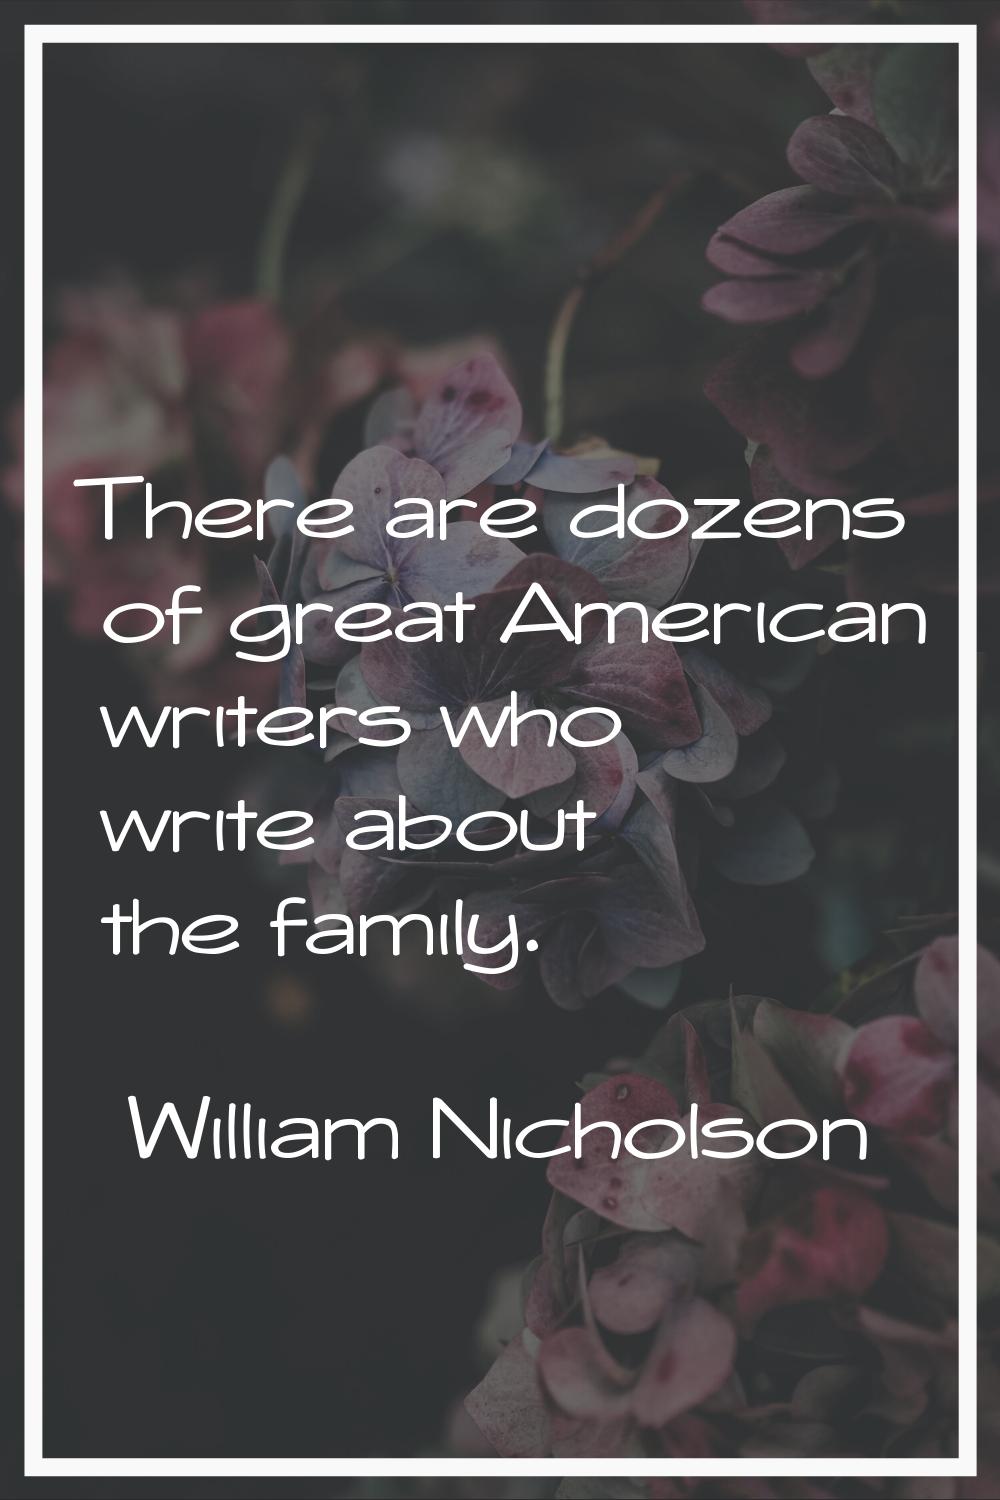 There are dozens of great American writers who write about the family.